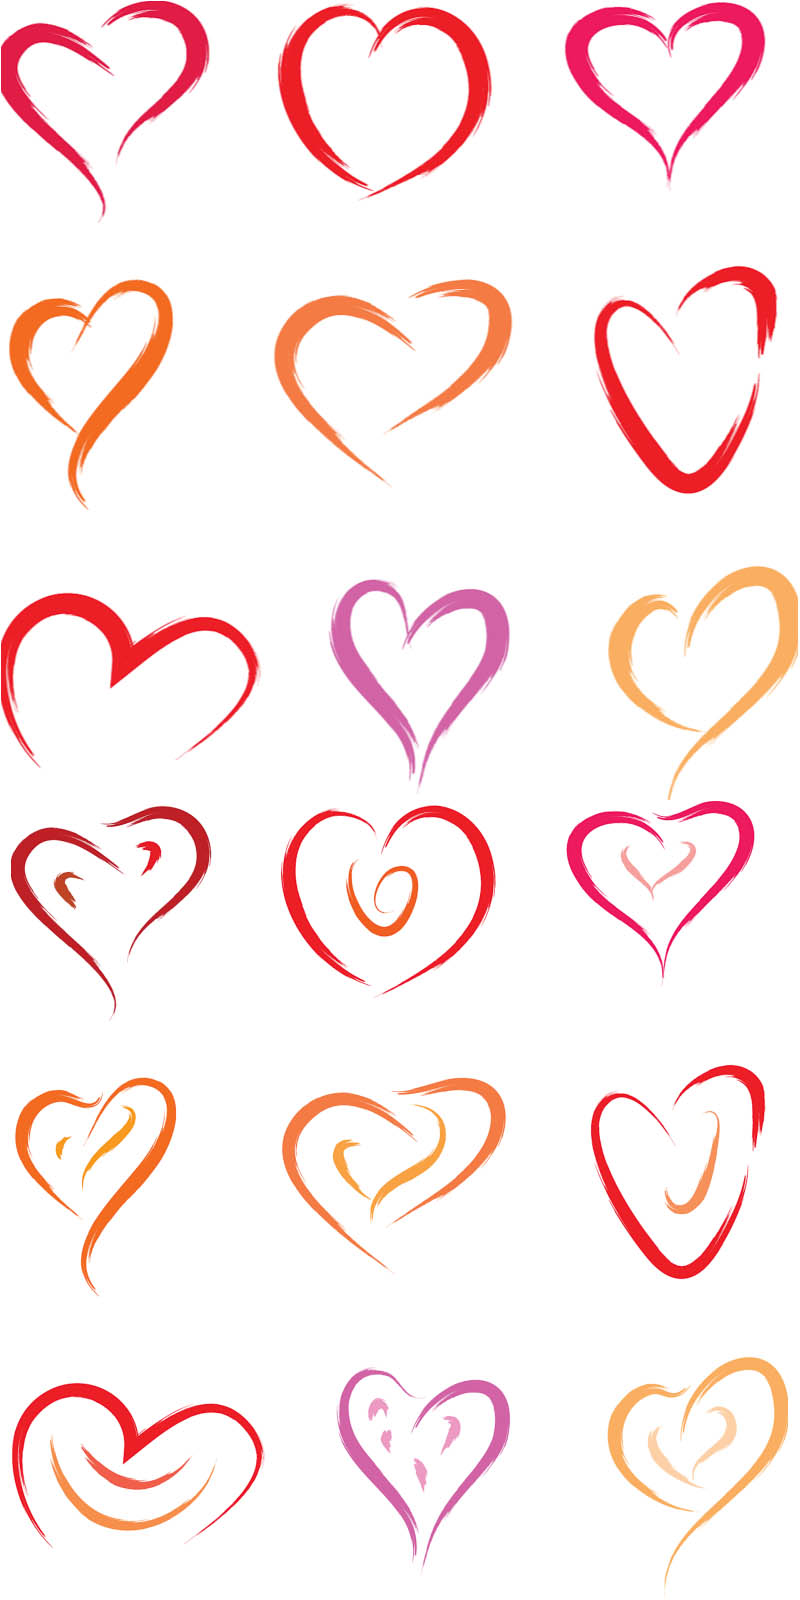 Colorful Heart Vector